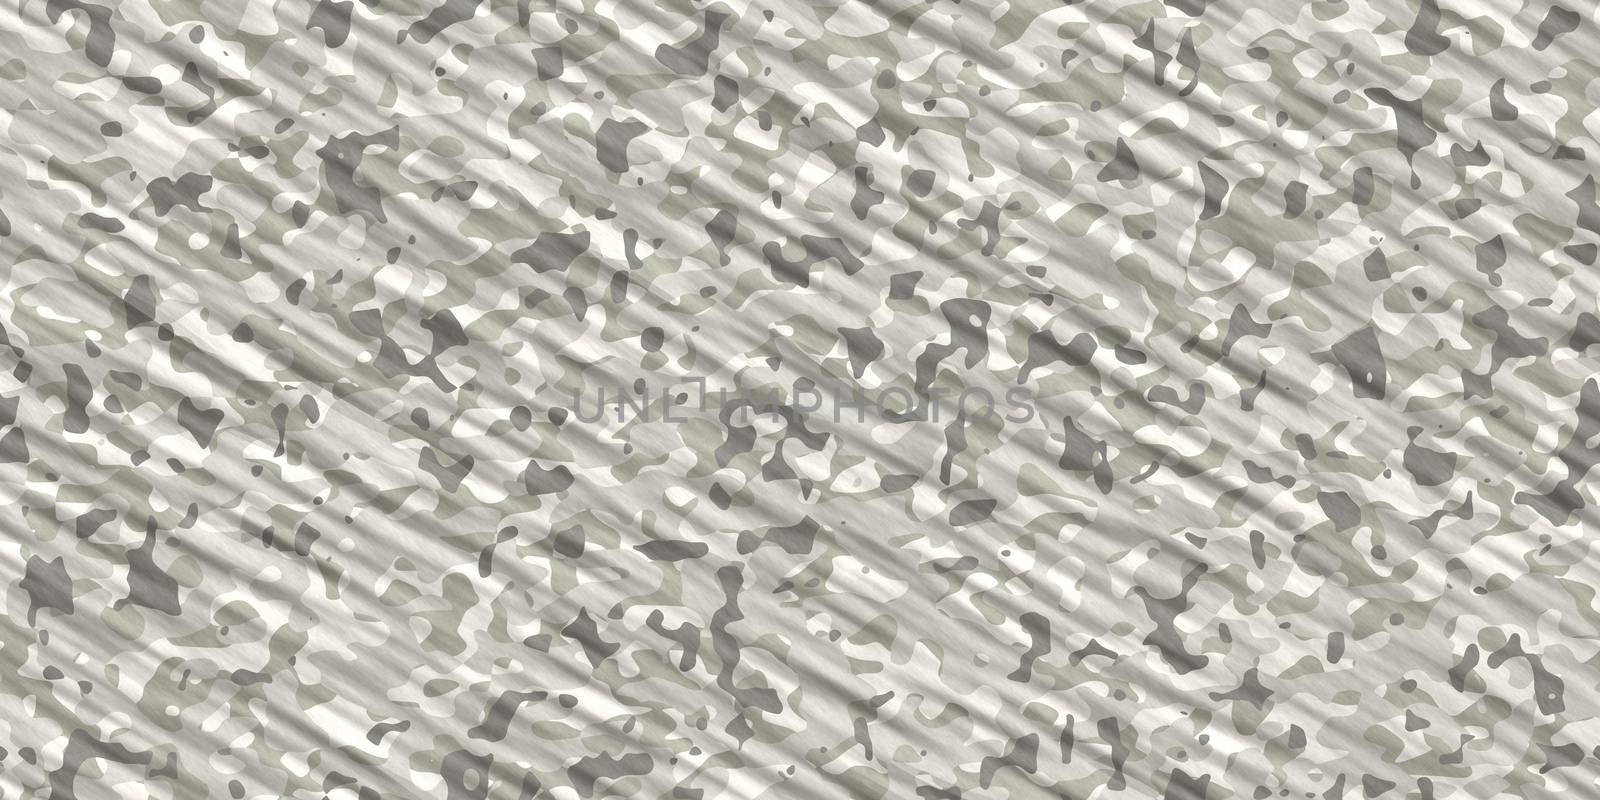 Gray Winter Army Camouflage Background. Military Uniform Clothing Texture. Seamless Combat Uniform.